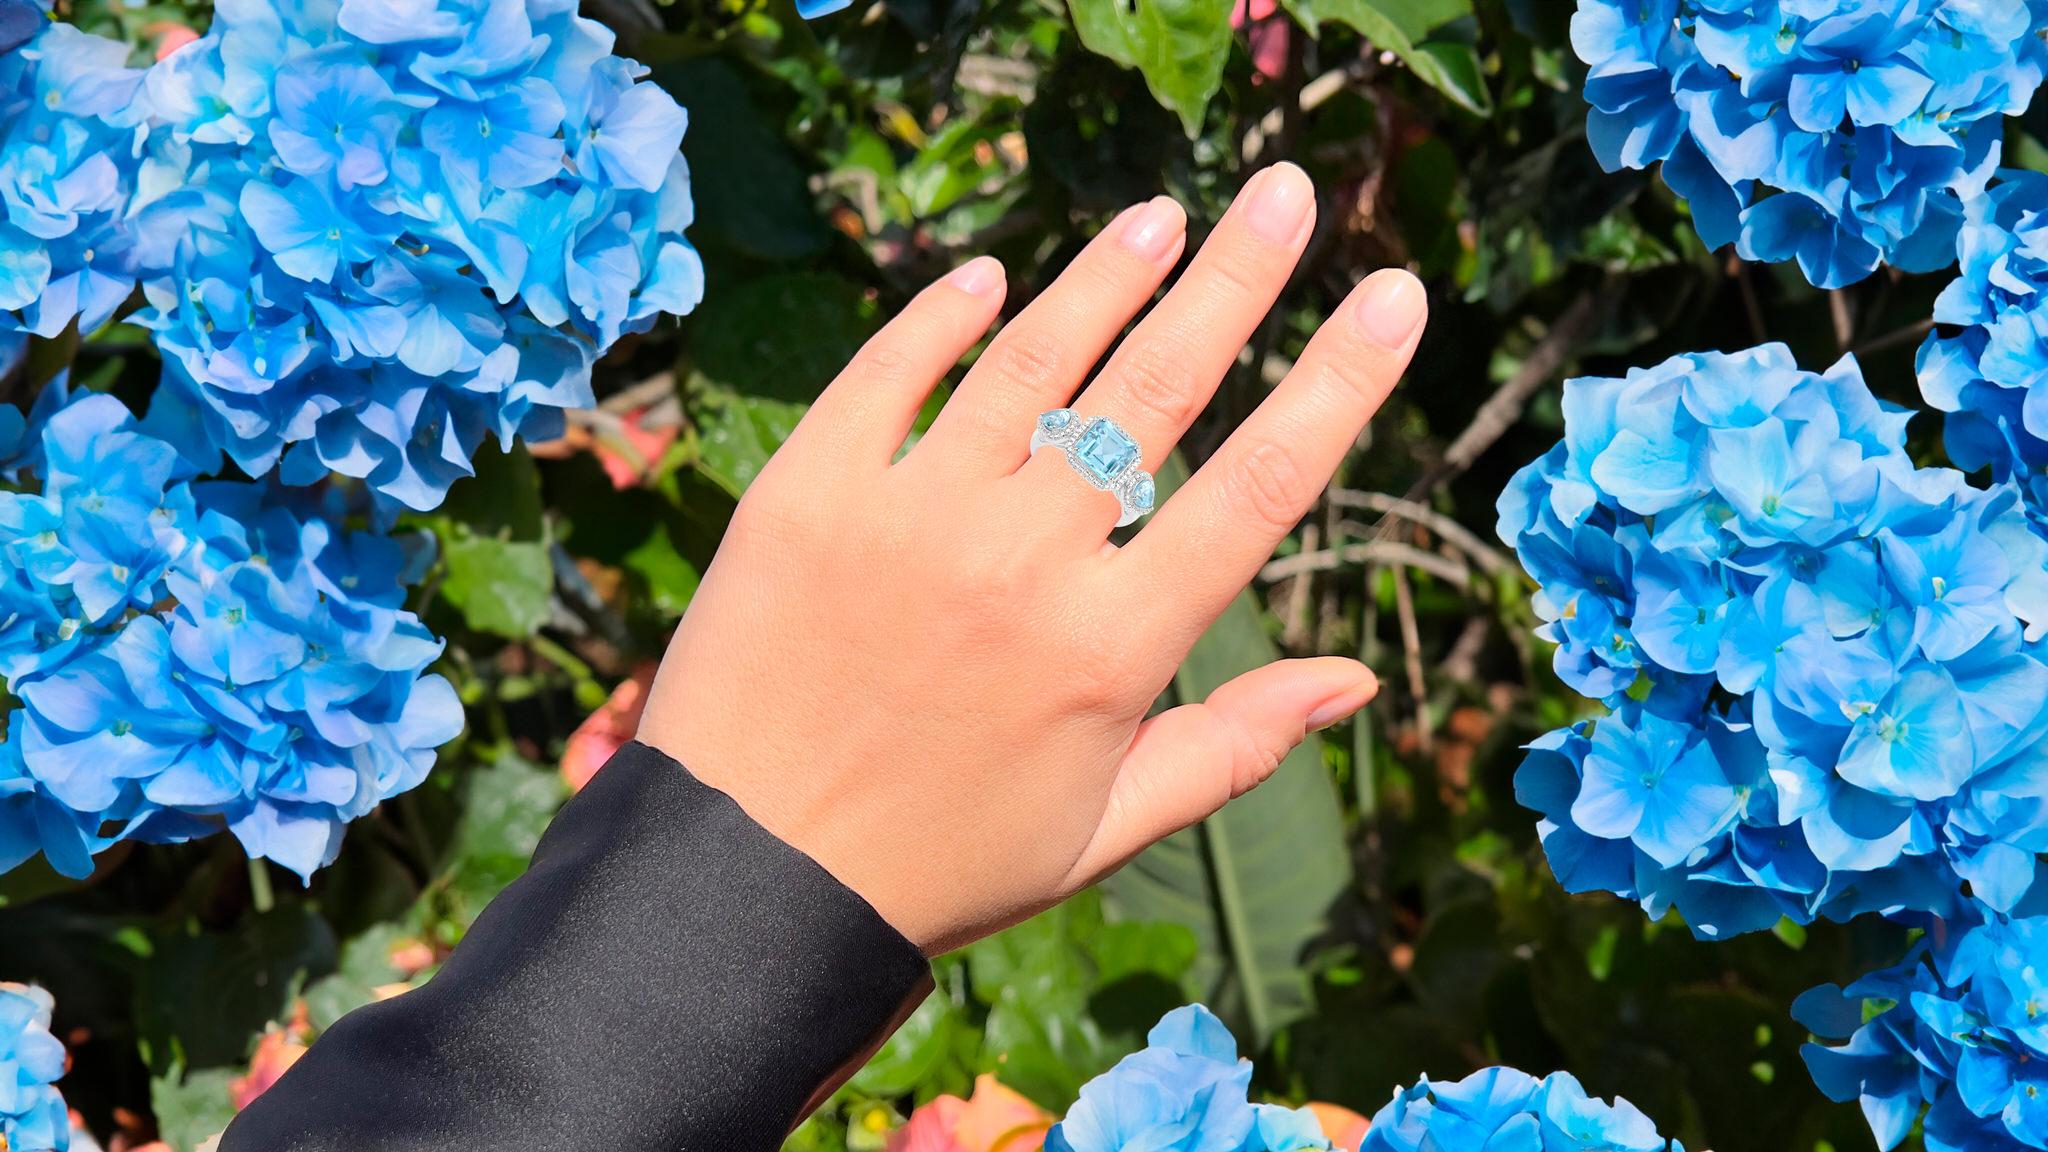 It comes with the Gemological Appraisal by GIA GG/AJP
All Gemstones are Natural
3 Blue Topazes = 3.85 Carats
Metal: Rhodium Plated Sterling Silver
Ring Size: 6* US
*It can be resized complimentary